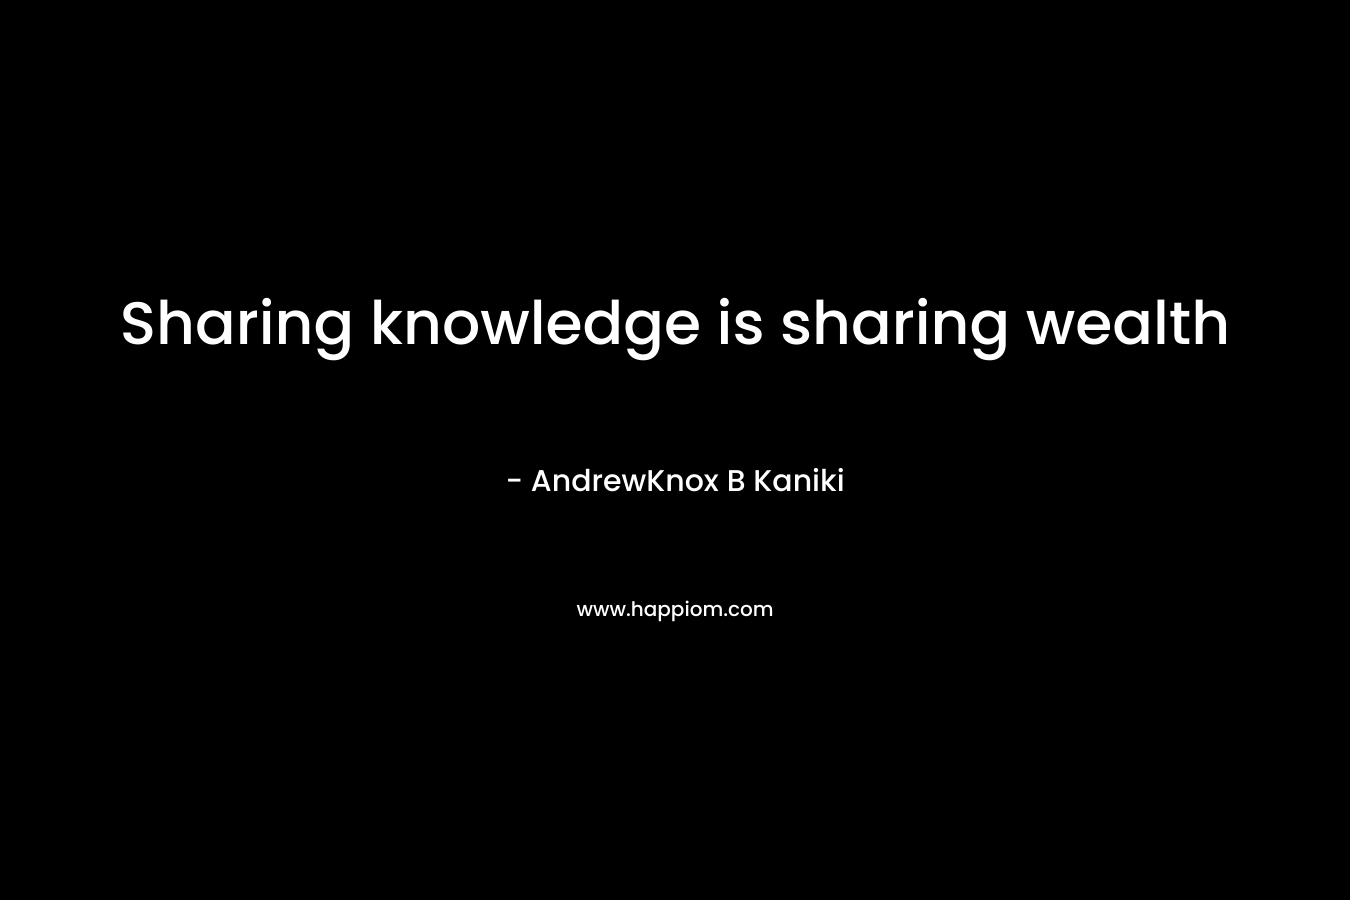 Sharing knowledge is sharing wealth